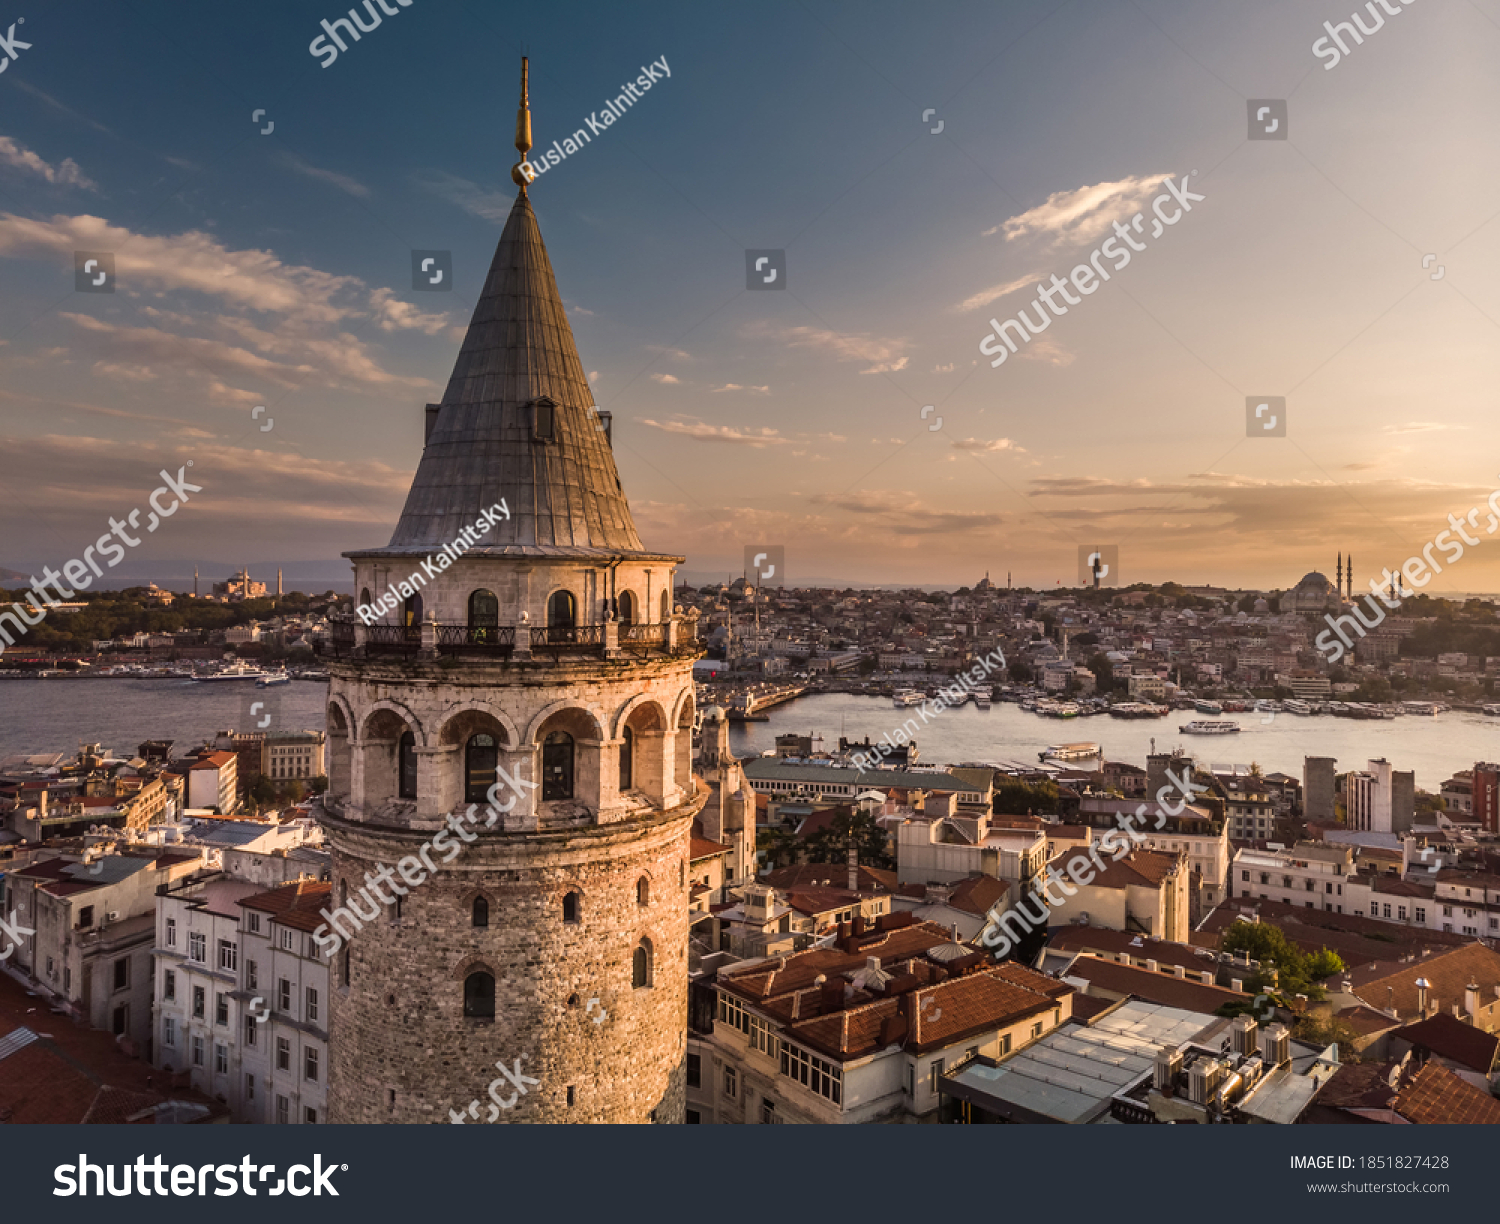 Aerial evening shot of the Galata Tower in Istanbul, Turkey. Aerial view of landmark at golden hour with beautiful sunlight. #1851827428